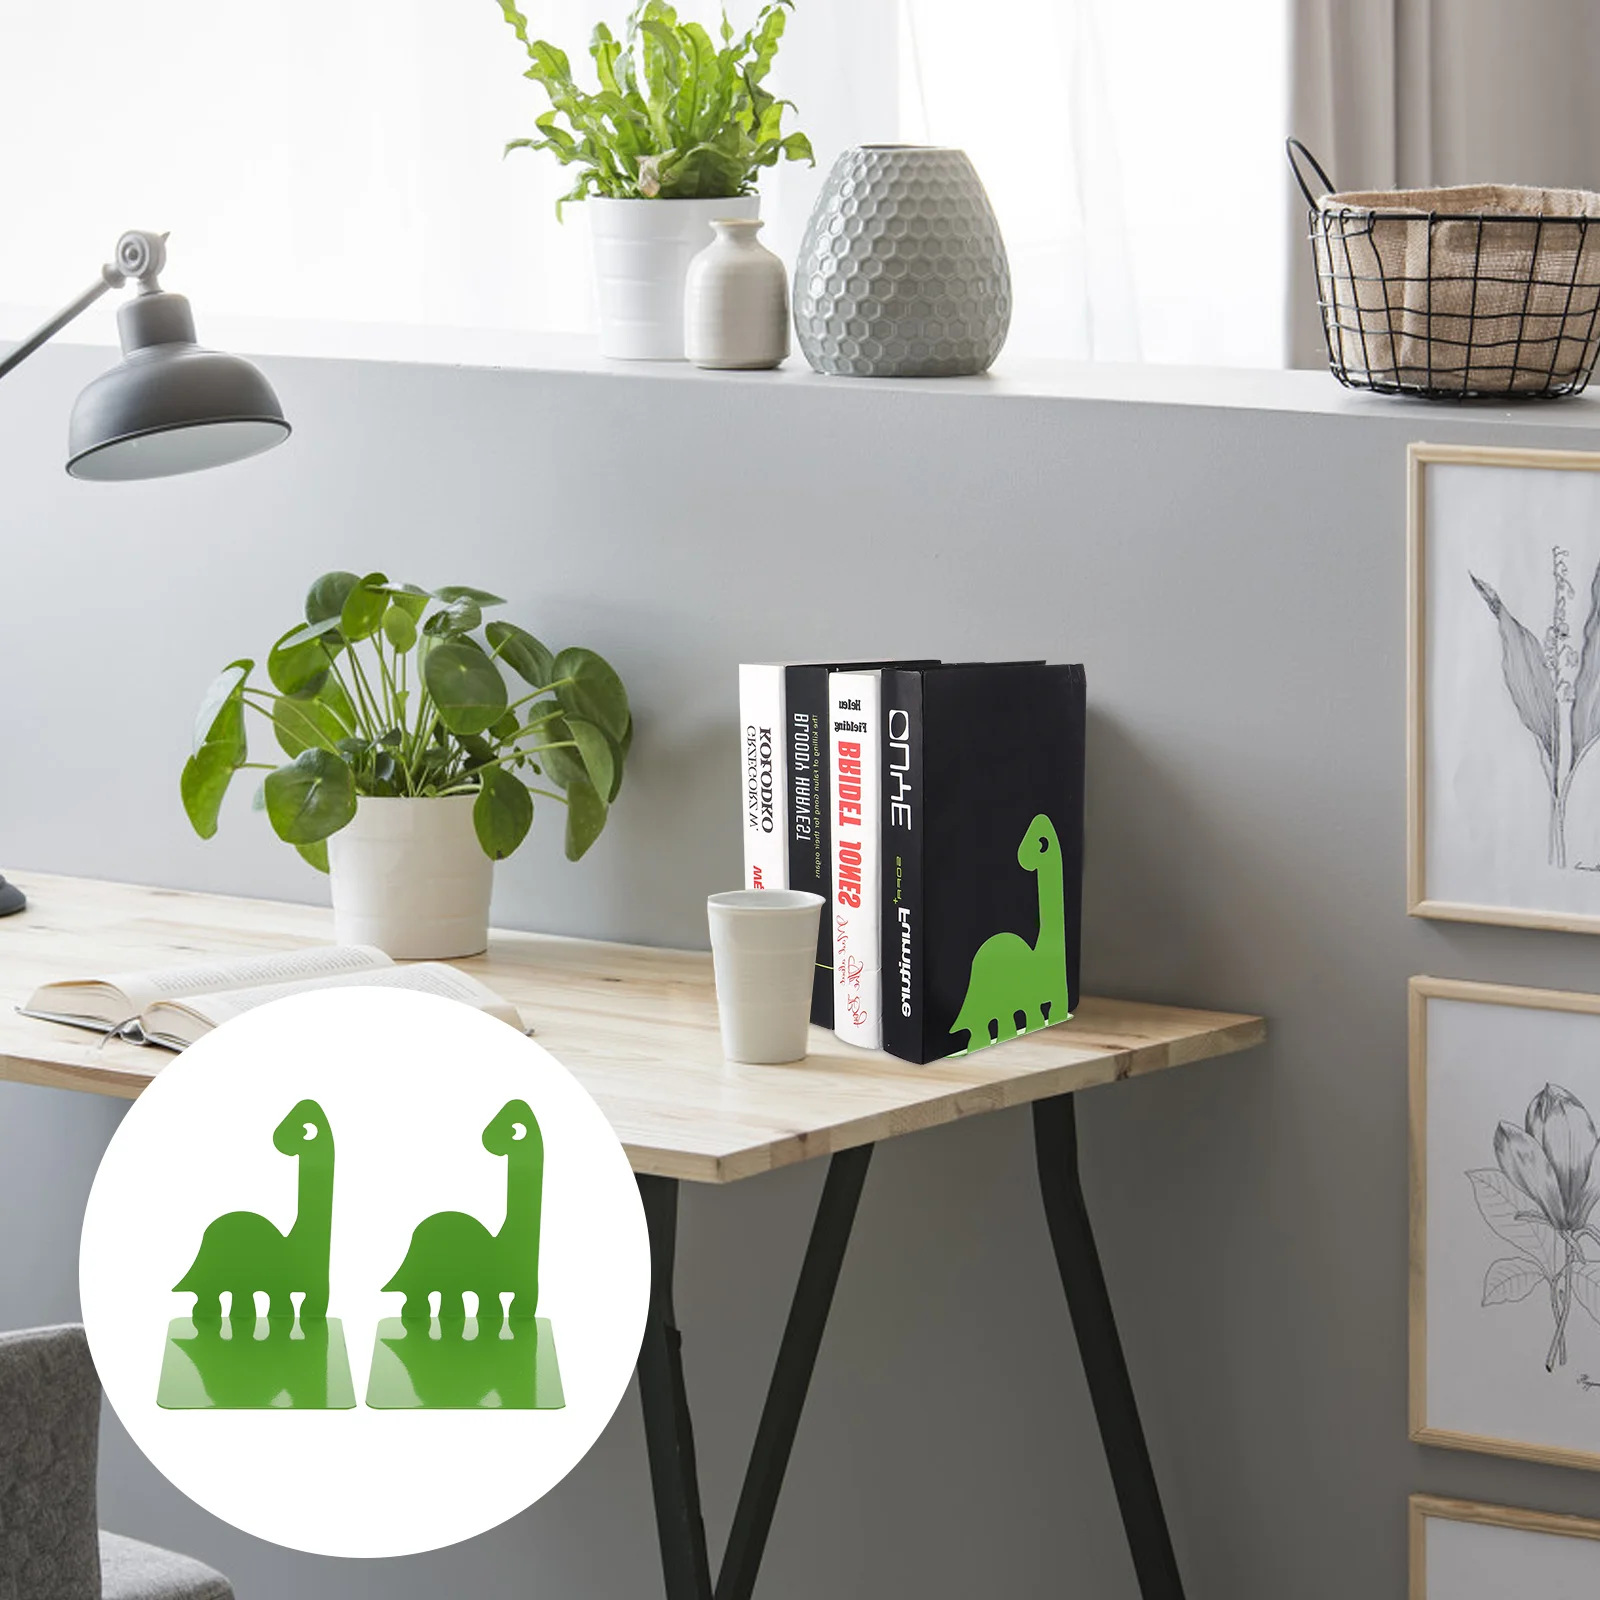 Dinosaur Metal Bookend Bookends Books Holder Status for Support Put The Accesories cat shape bookend books stand organizer for accesories support bookends non slip